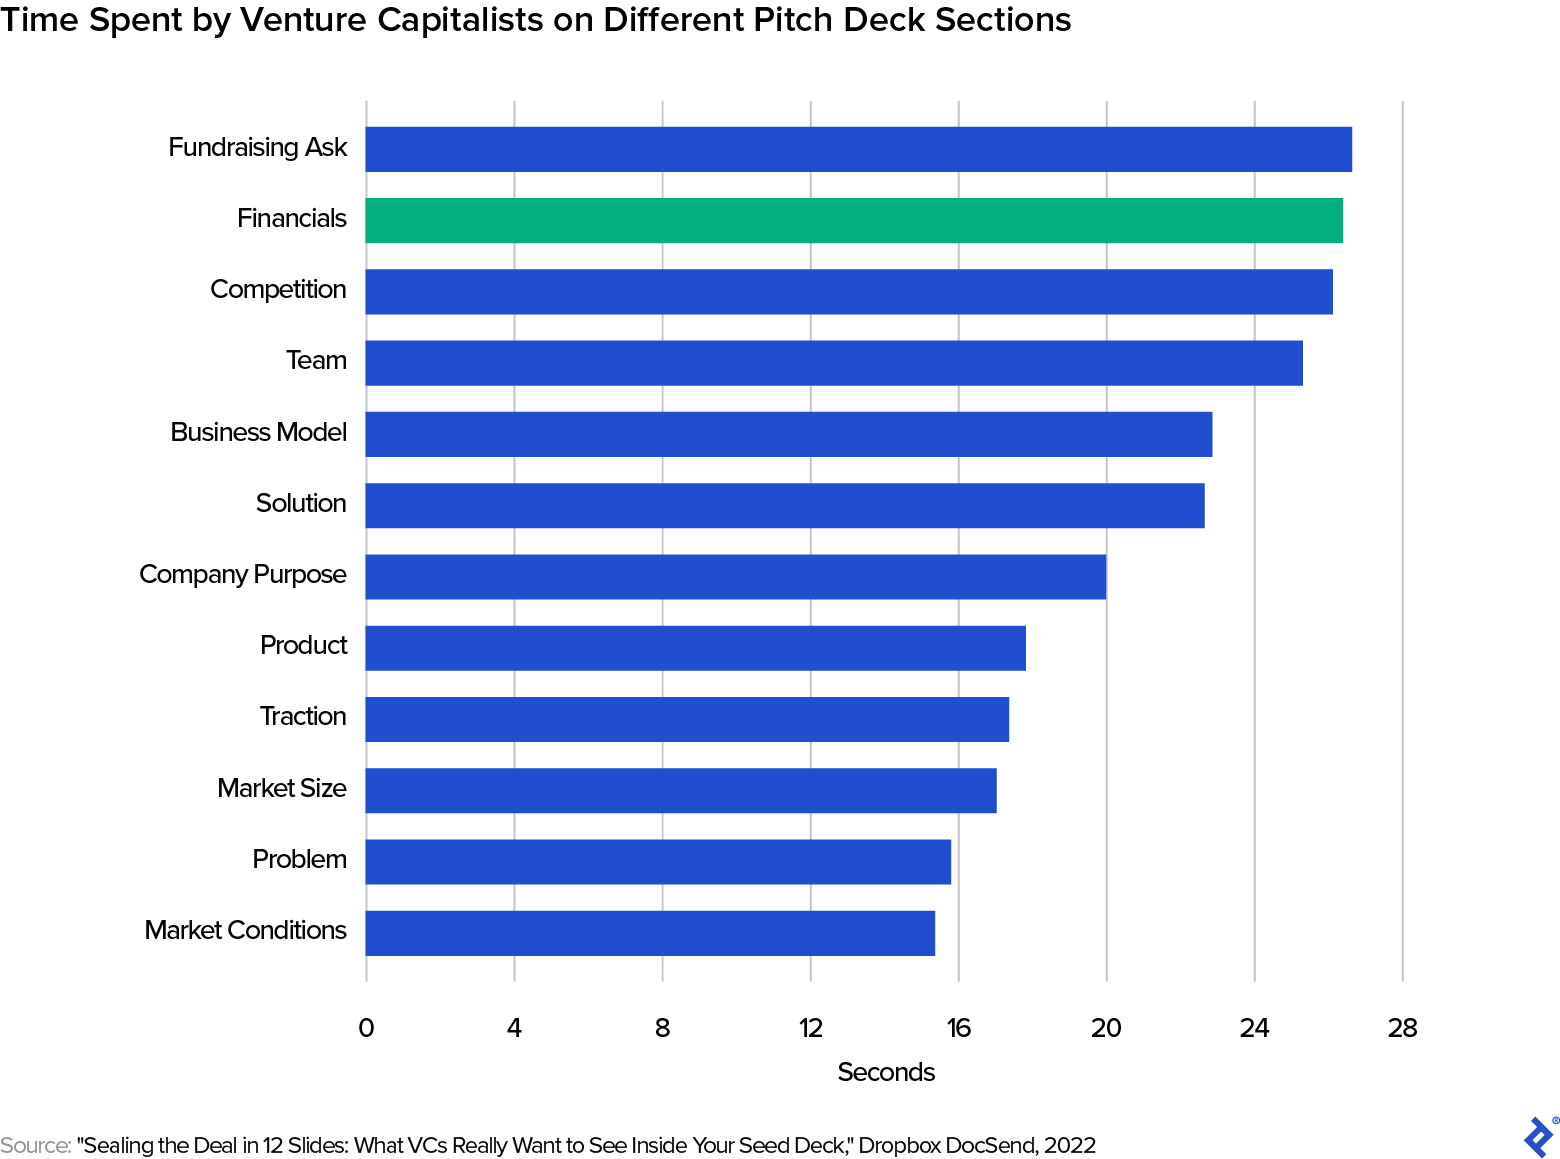 A bar chart showing time spent by VCs on various pitch deck sections. Financials is the second largest, at approximately 25 seconds.